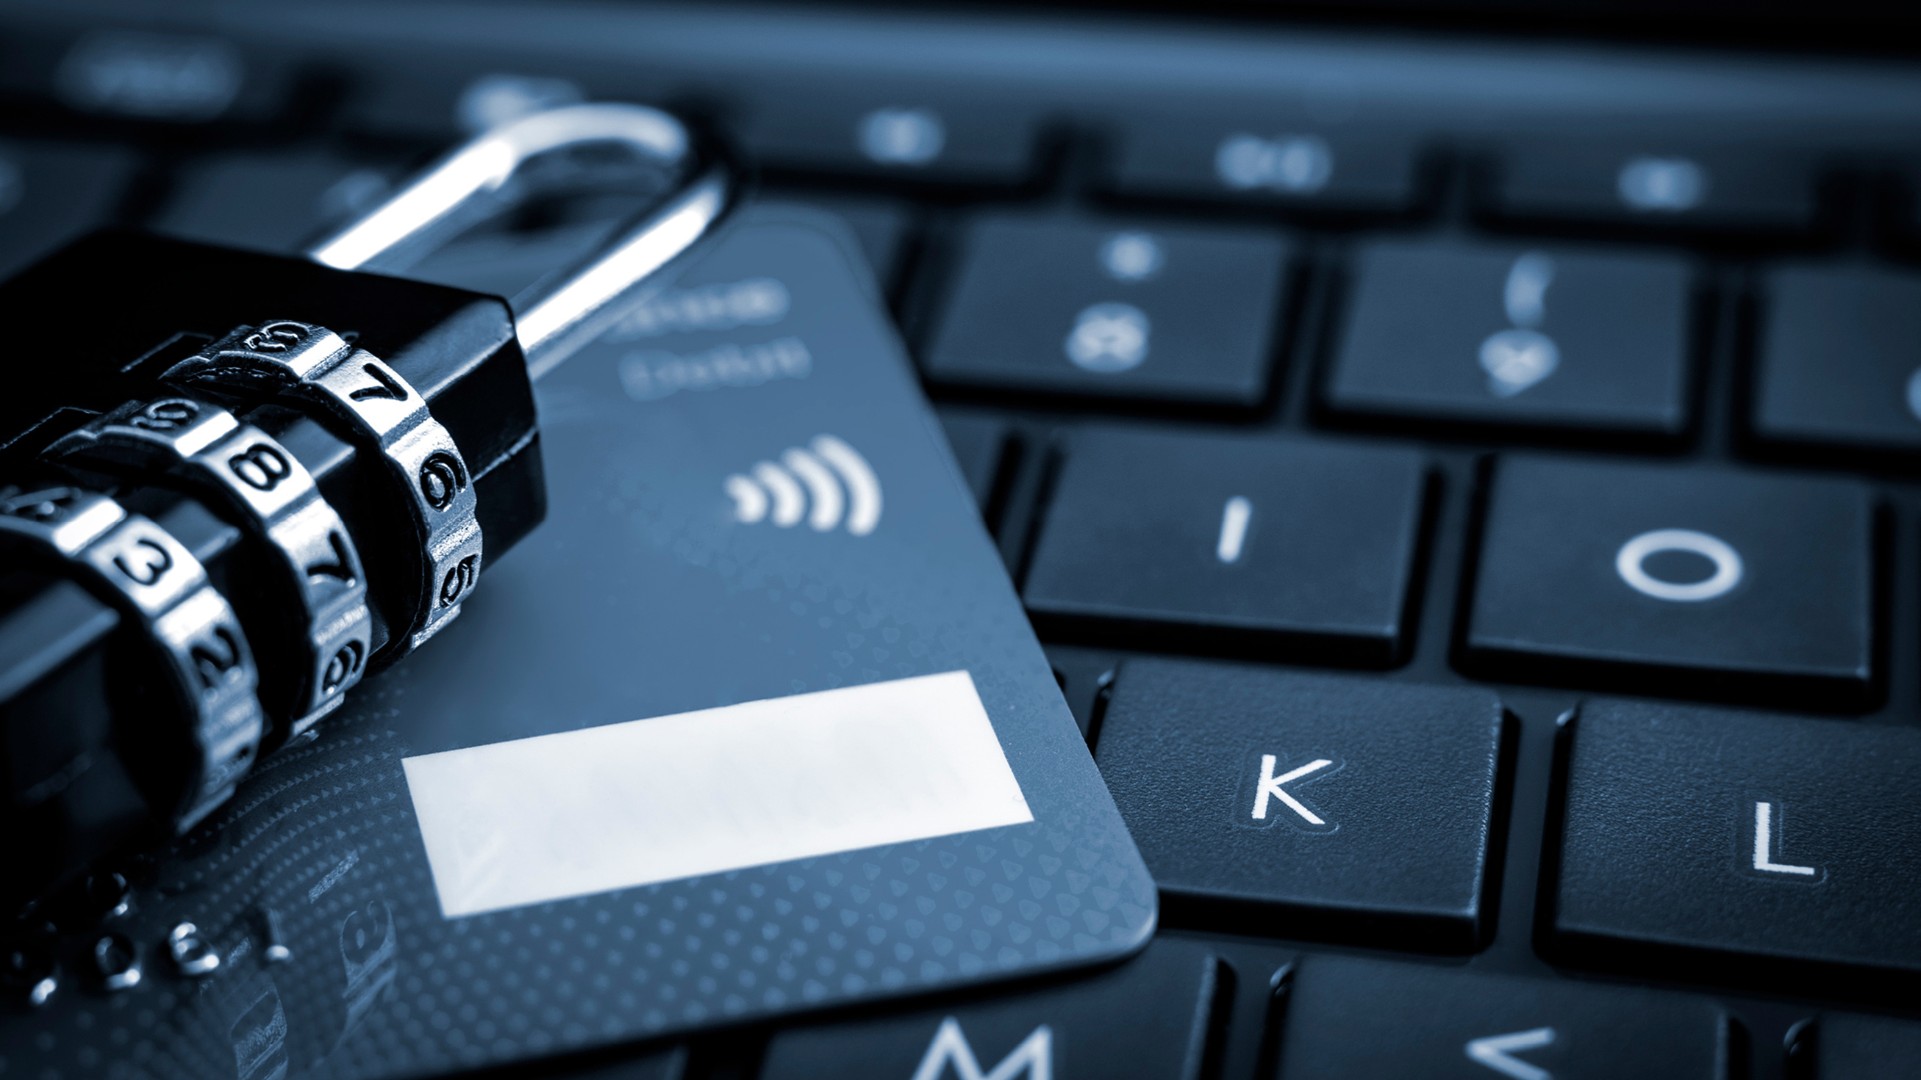 Keeping transactions safe and building customer's trust